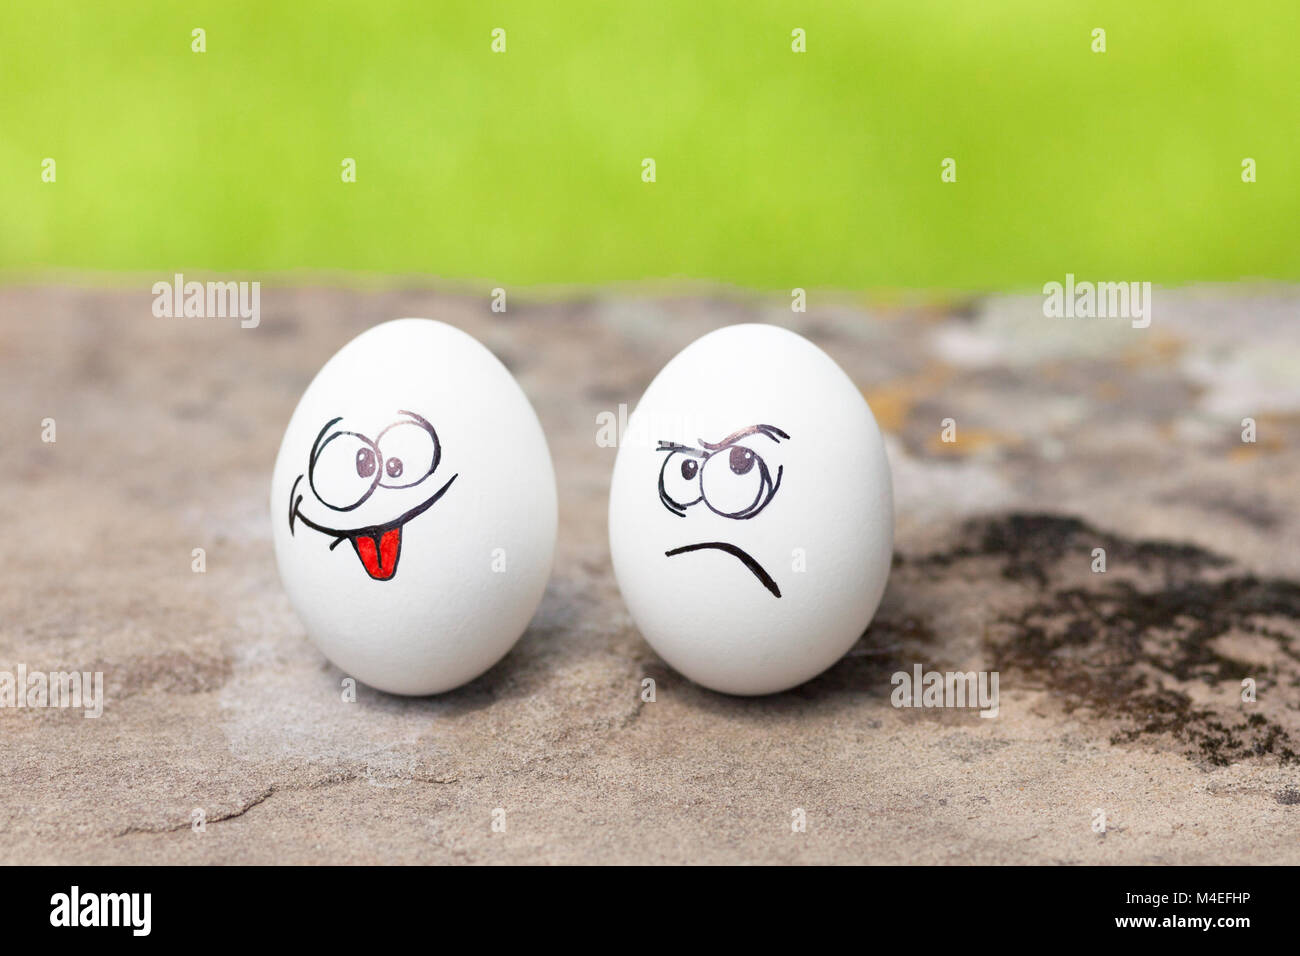 Angry and mischievous faces drawn on eggs Stock Photo